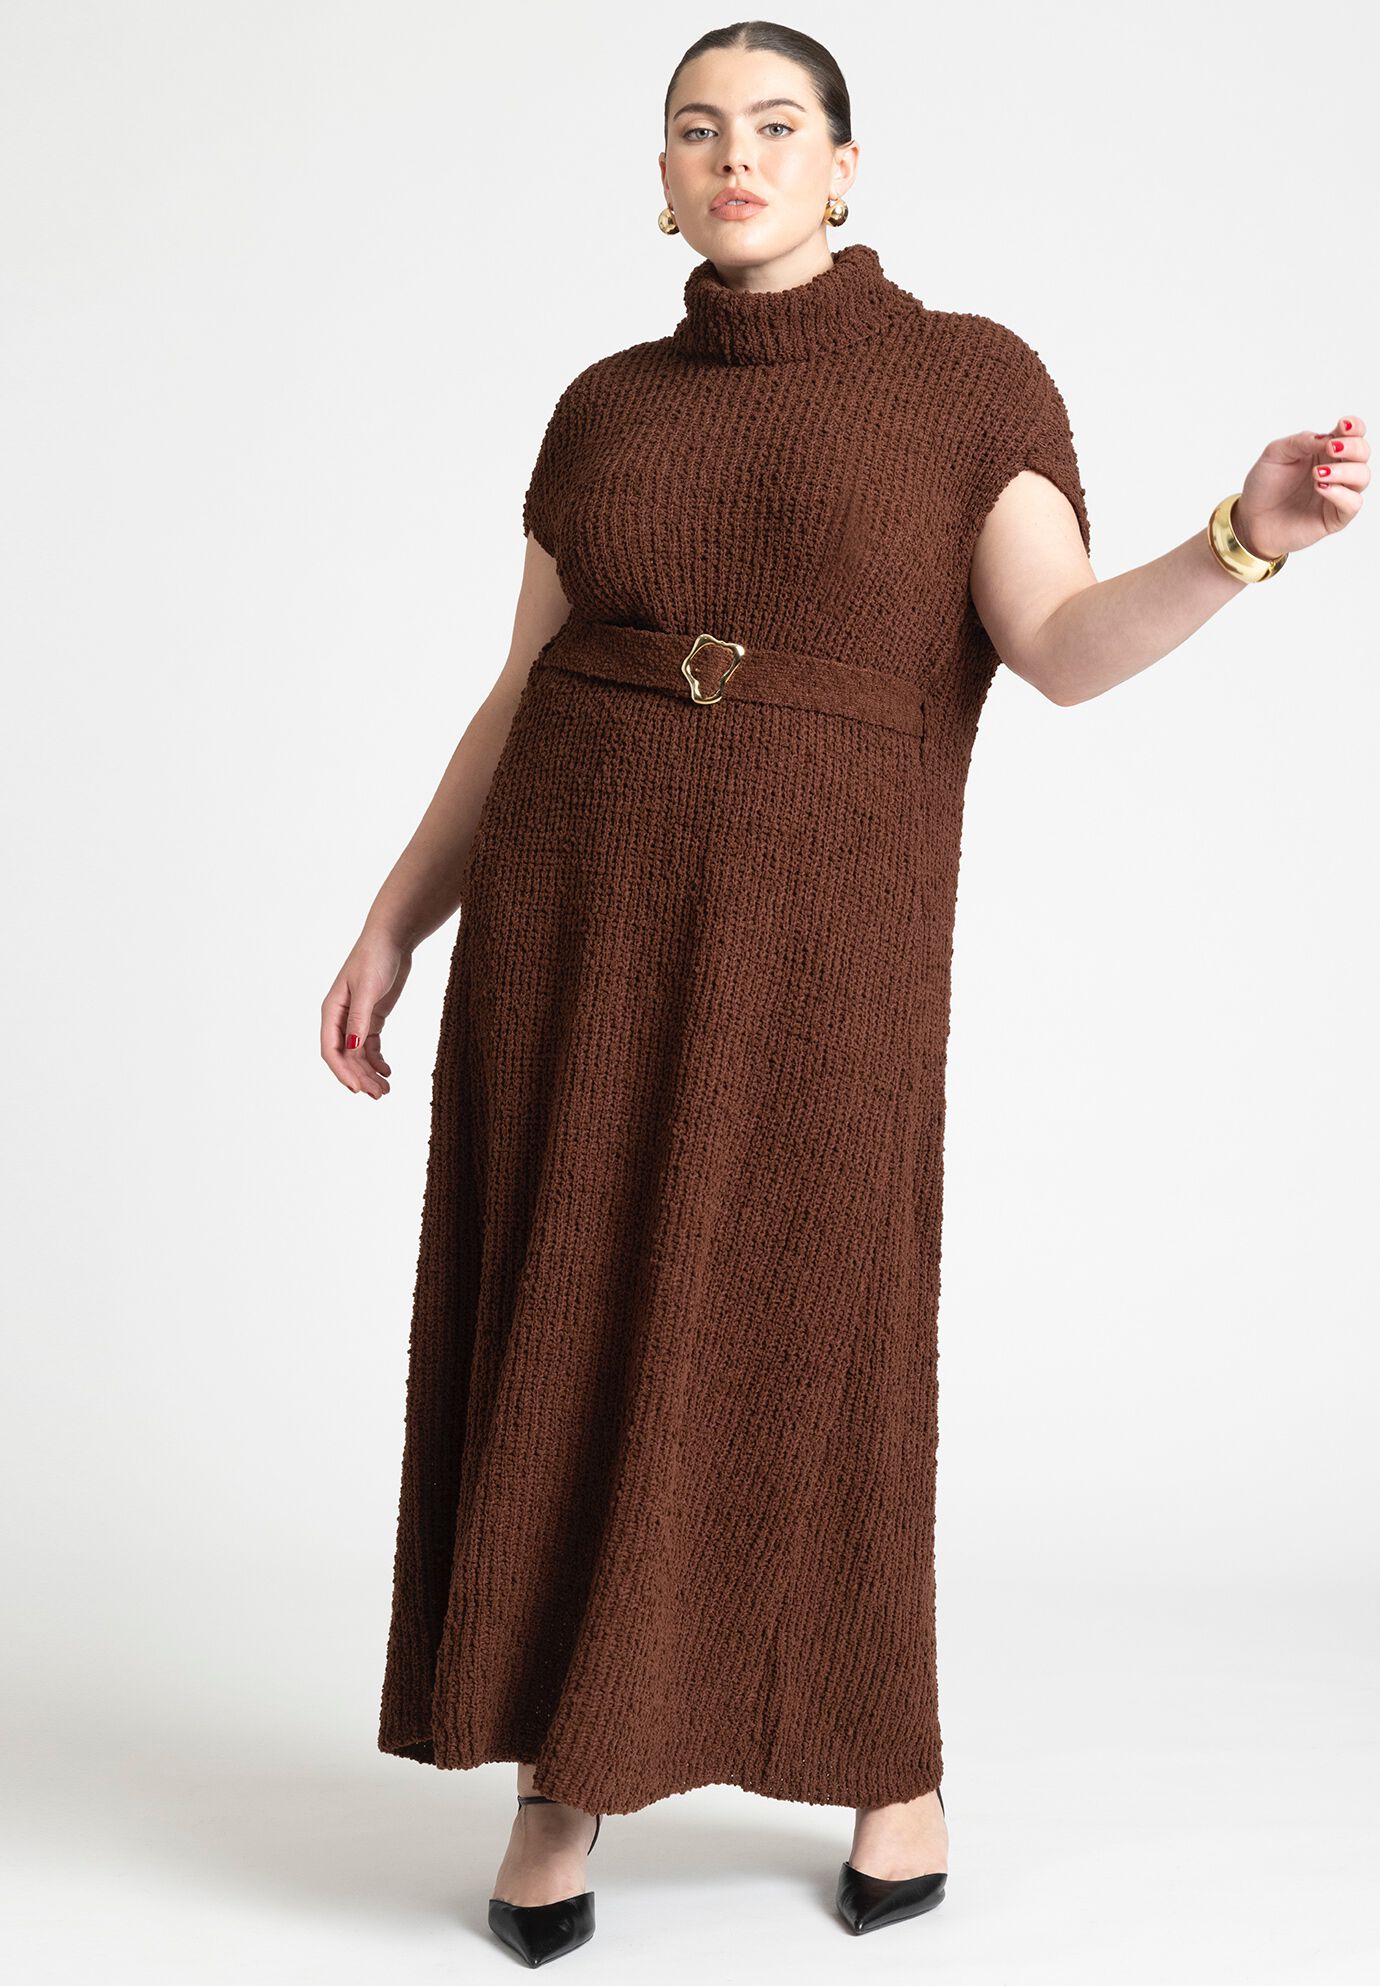 Polyester Turtleneck Sweater Dress by Eloquii